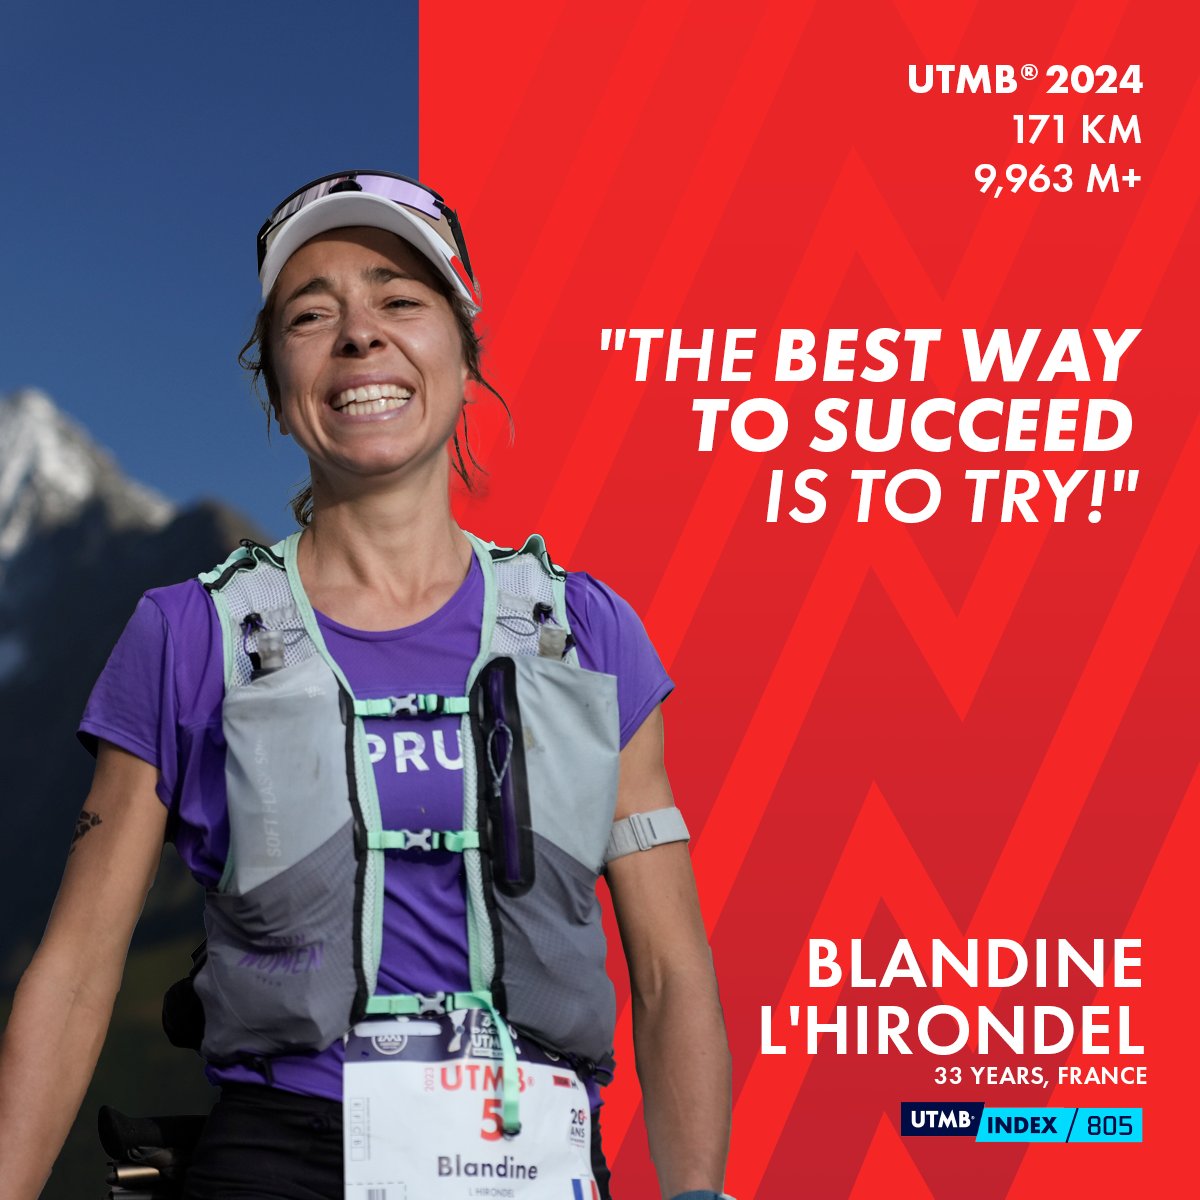 🟥 𝗨𝗧𝗠𝗕 𝗙𝗔𝗩𝗢𝗥𝗜𝗧𝗘𝗦 

2021: OCC 🏆
2022: CCC 🏆
2023: UTMB 🥉
2024: What's next for Blandine L'Hirondel? 

After a podium finish for her 1st attempt, Blandine will come back to the UTMB Mont-Blanc this year 👉 montblanc.utmb.world/races-runners/… 🌍

#DaciaUTMBMontBlanc